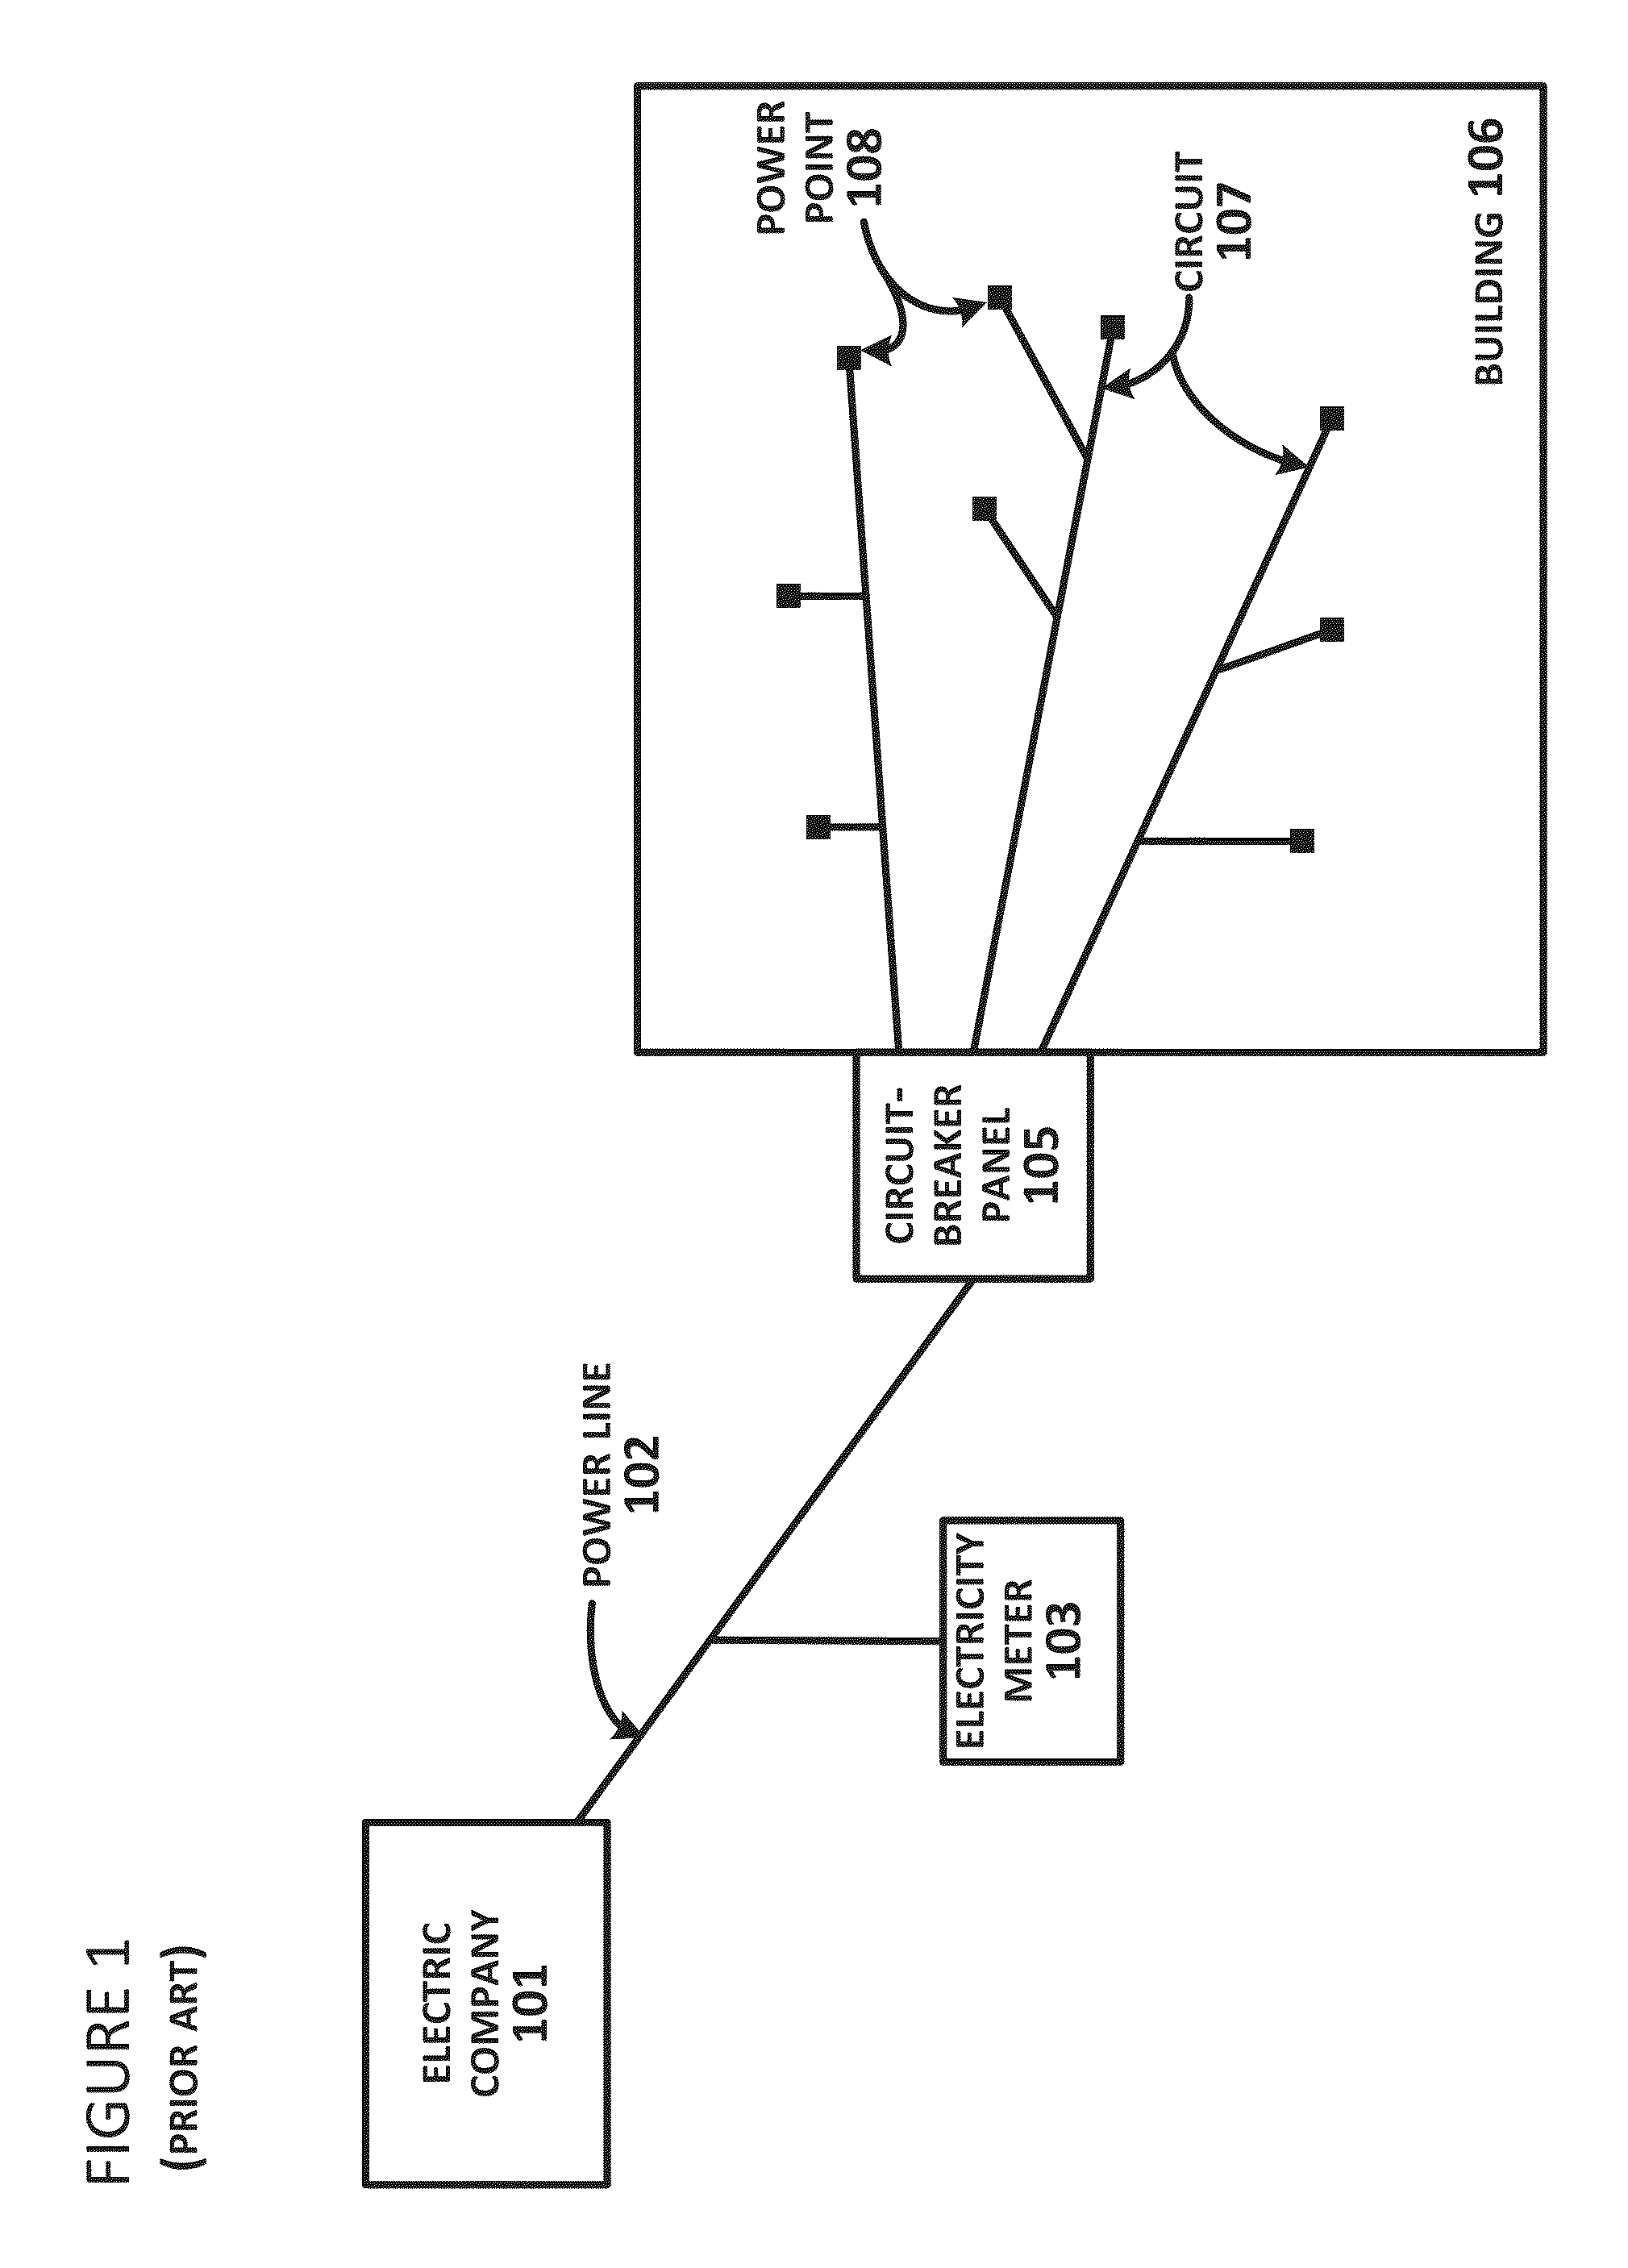 System and Method of Waveform Analysis to Identify and Characterize Power-Consuming Devices on Electrical Circuits